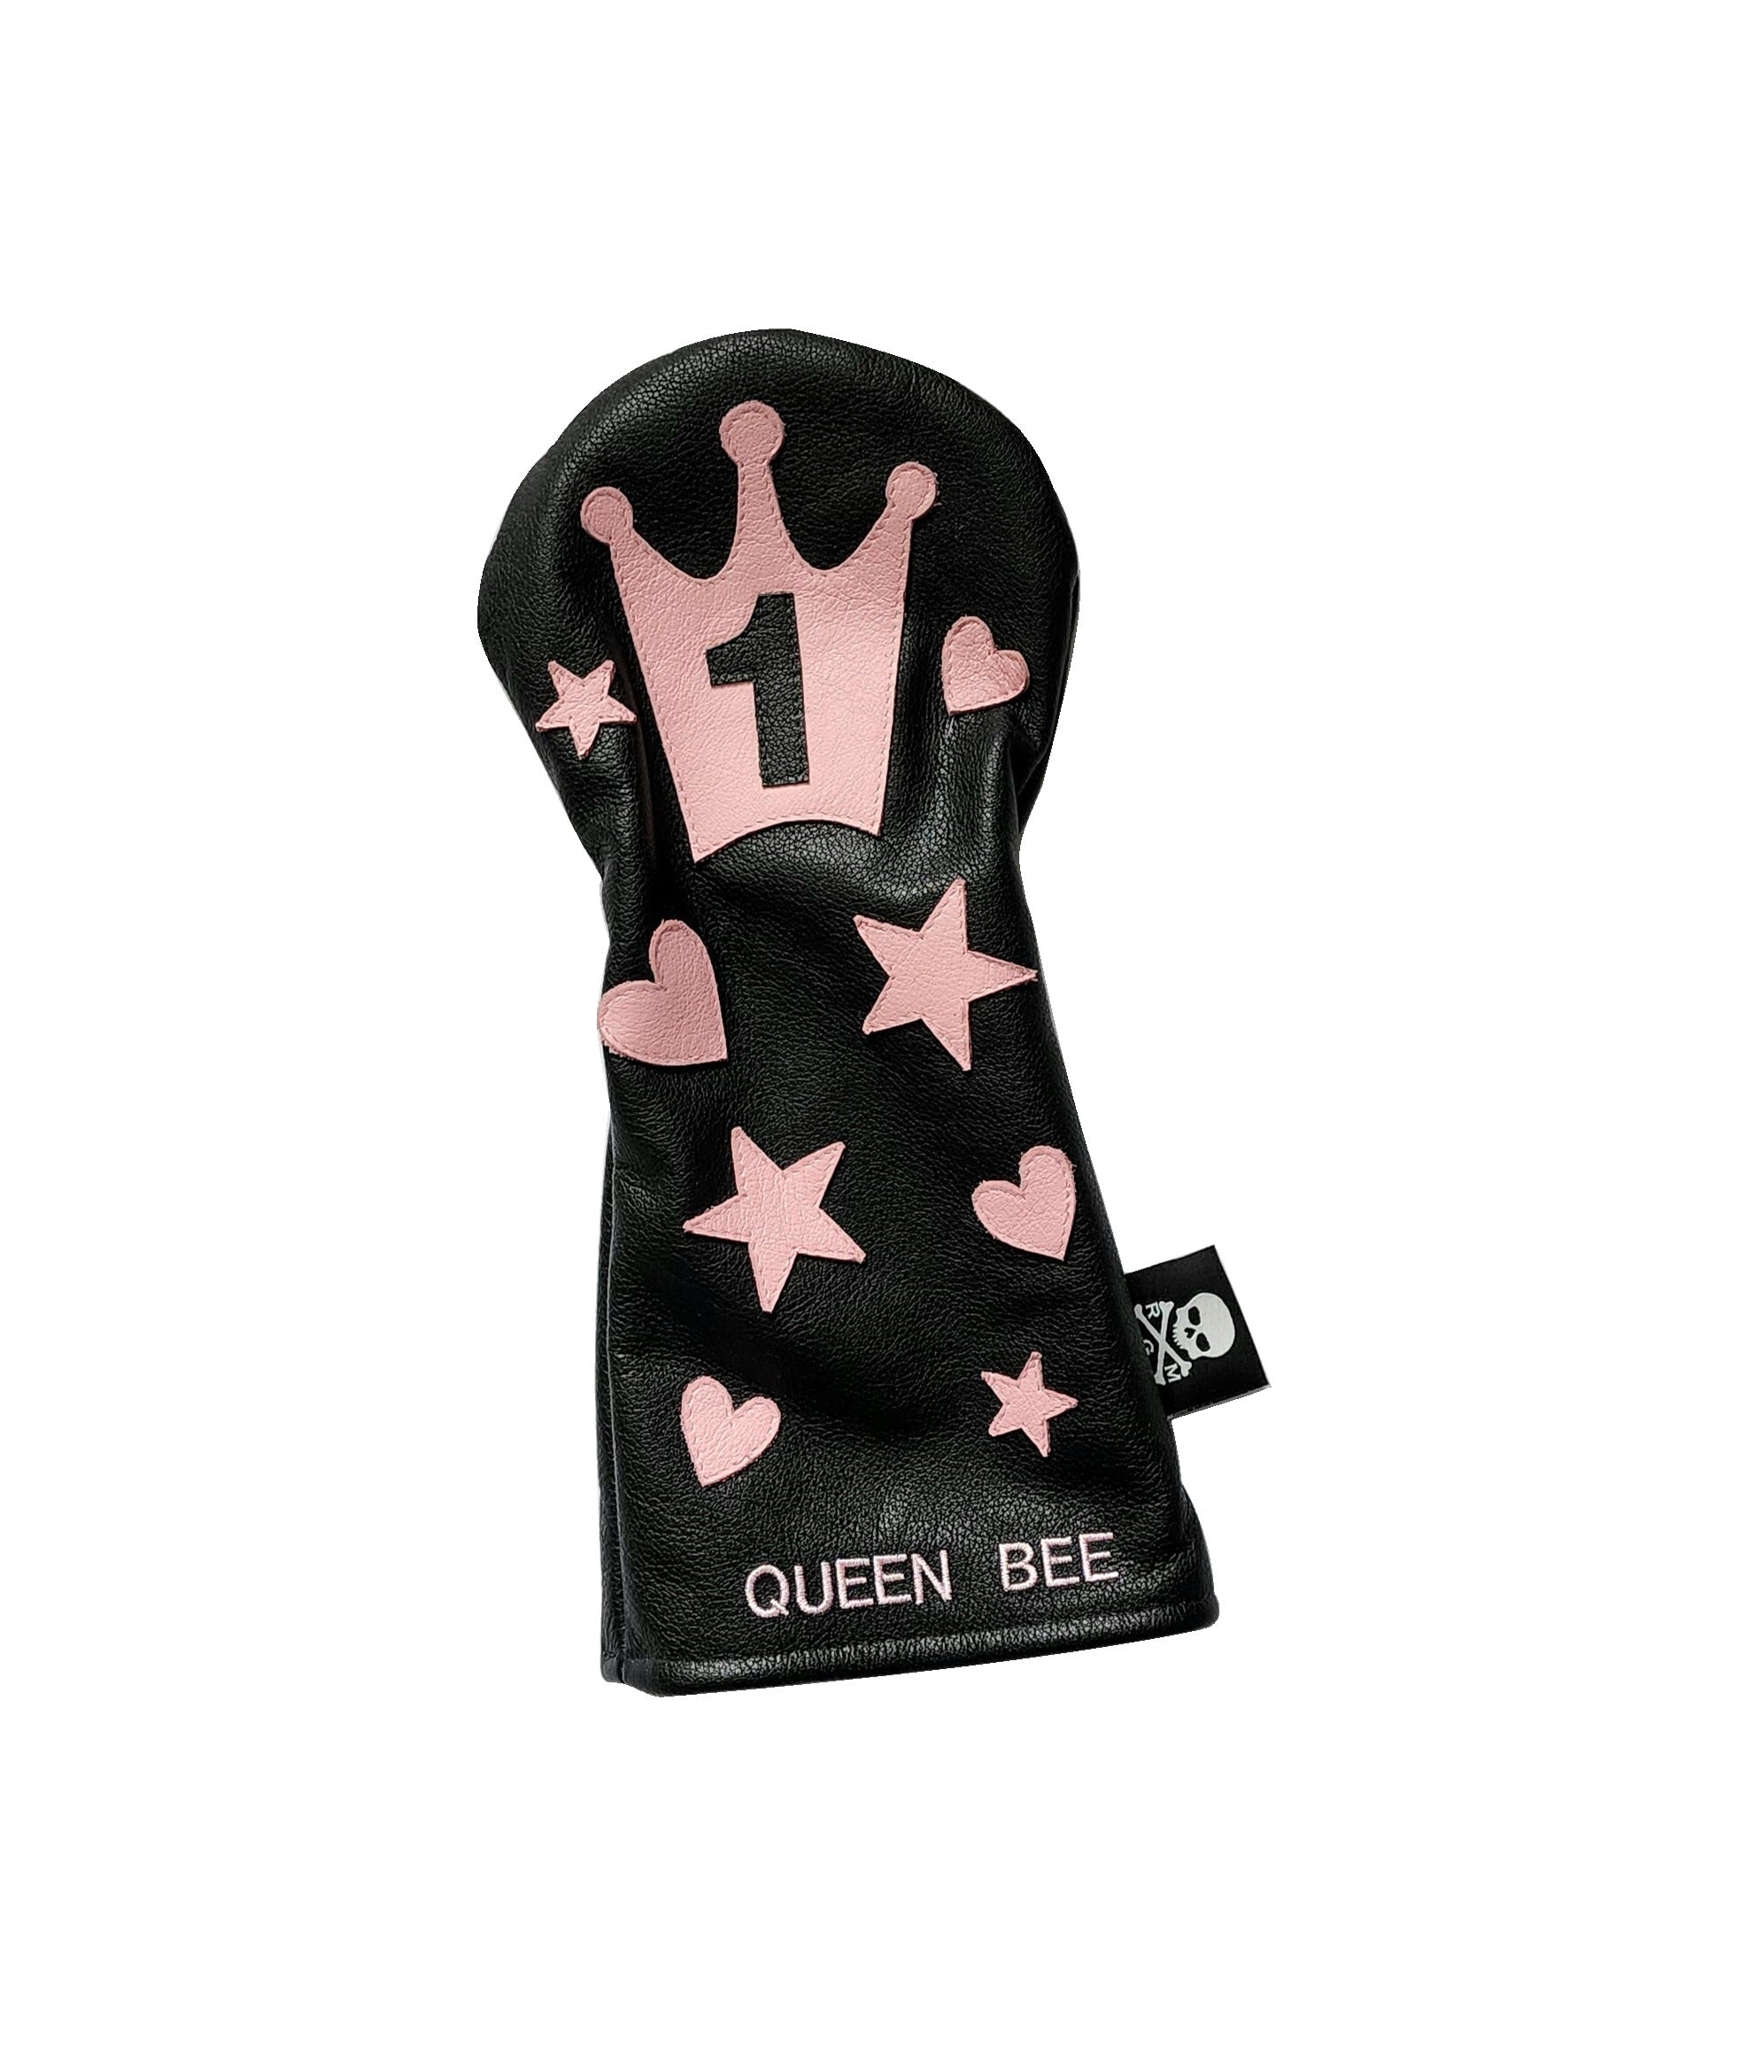 One-Of-A-Kind! Queen Bee Driver Headcover - Robert Mark Golf